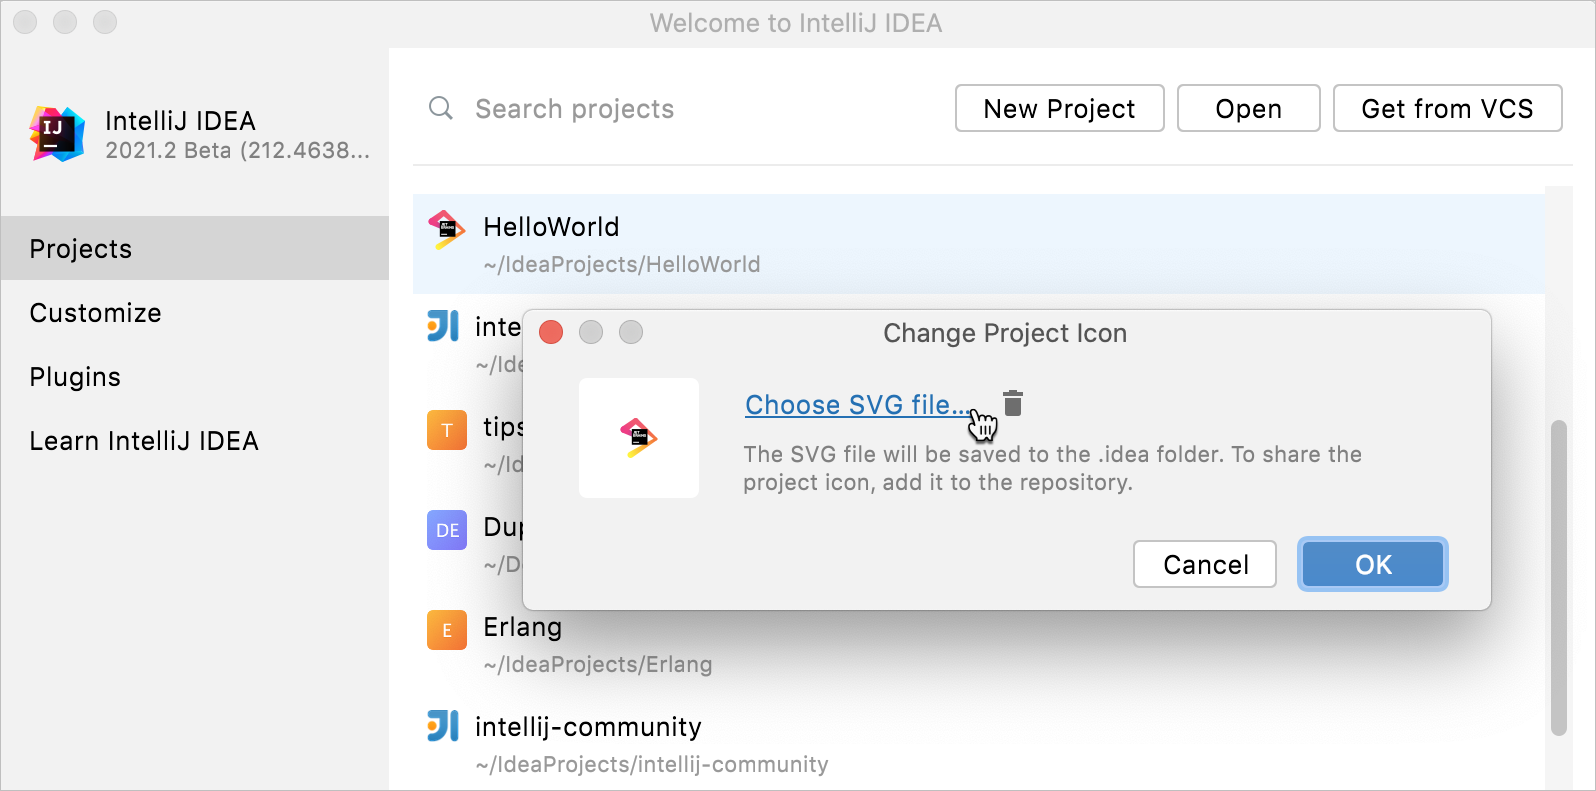 Changing project icon on Welcome screen